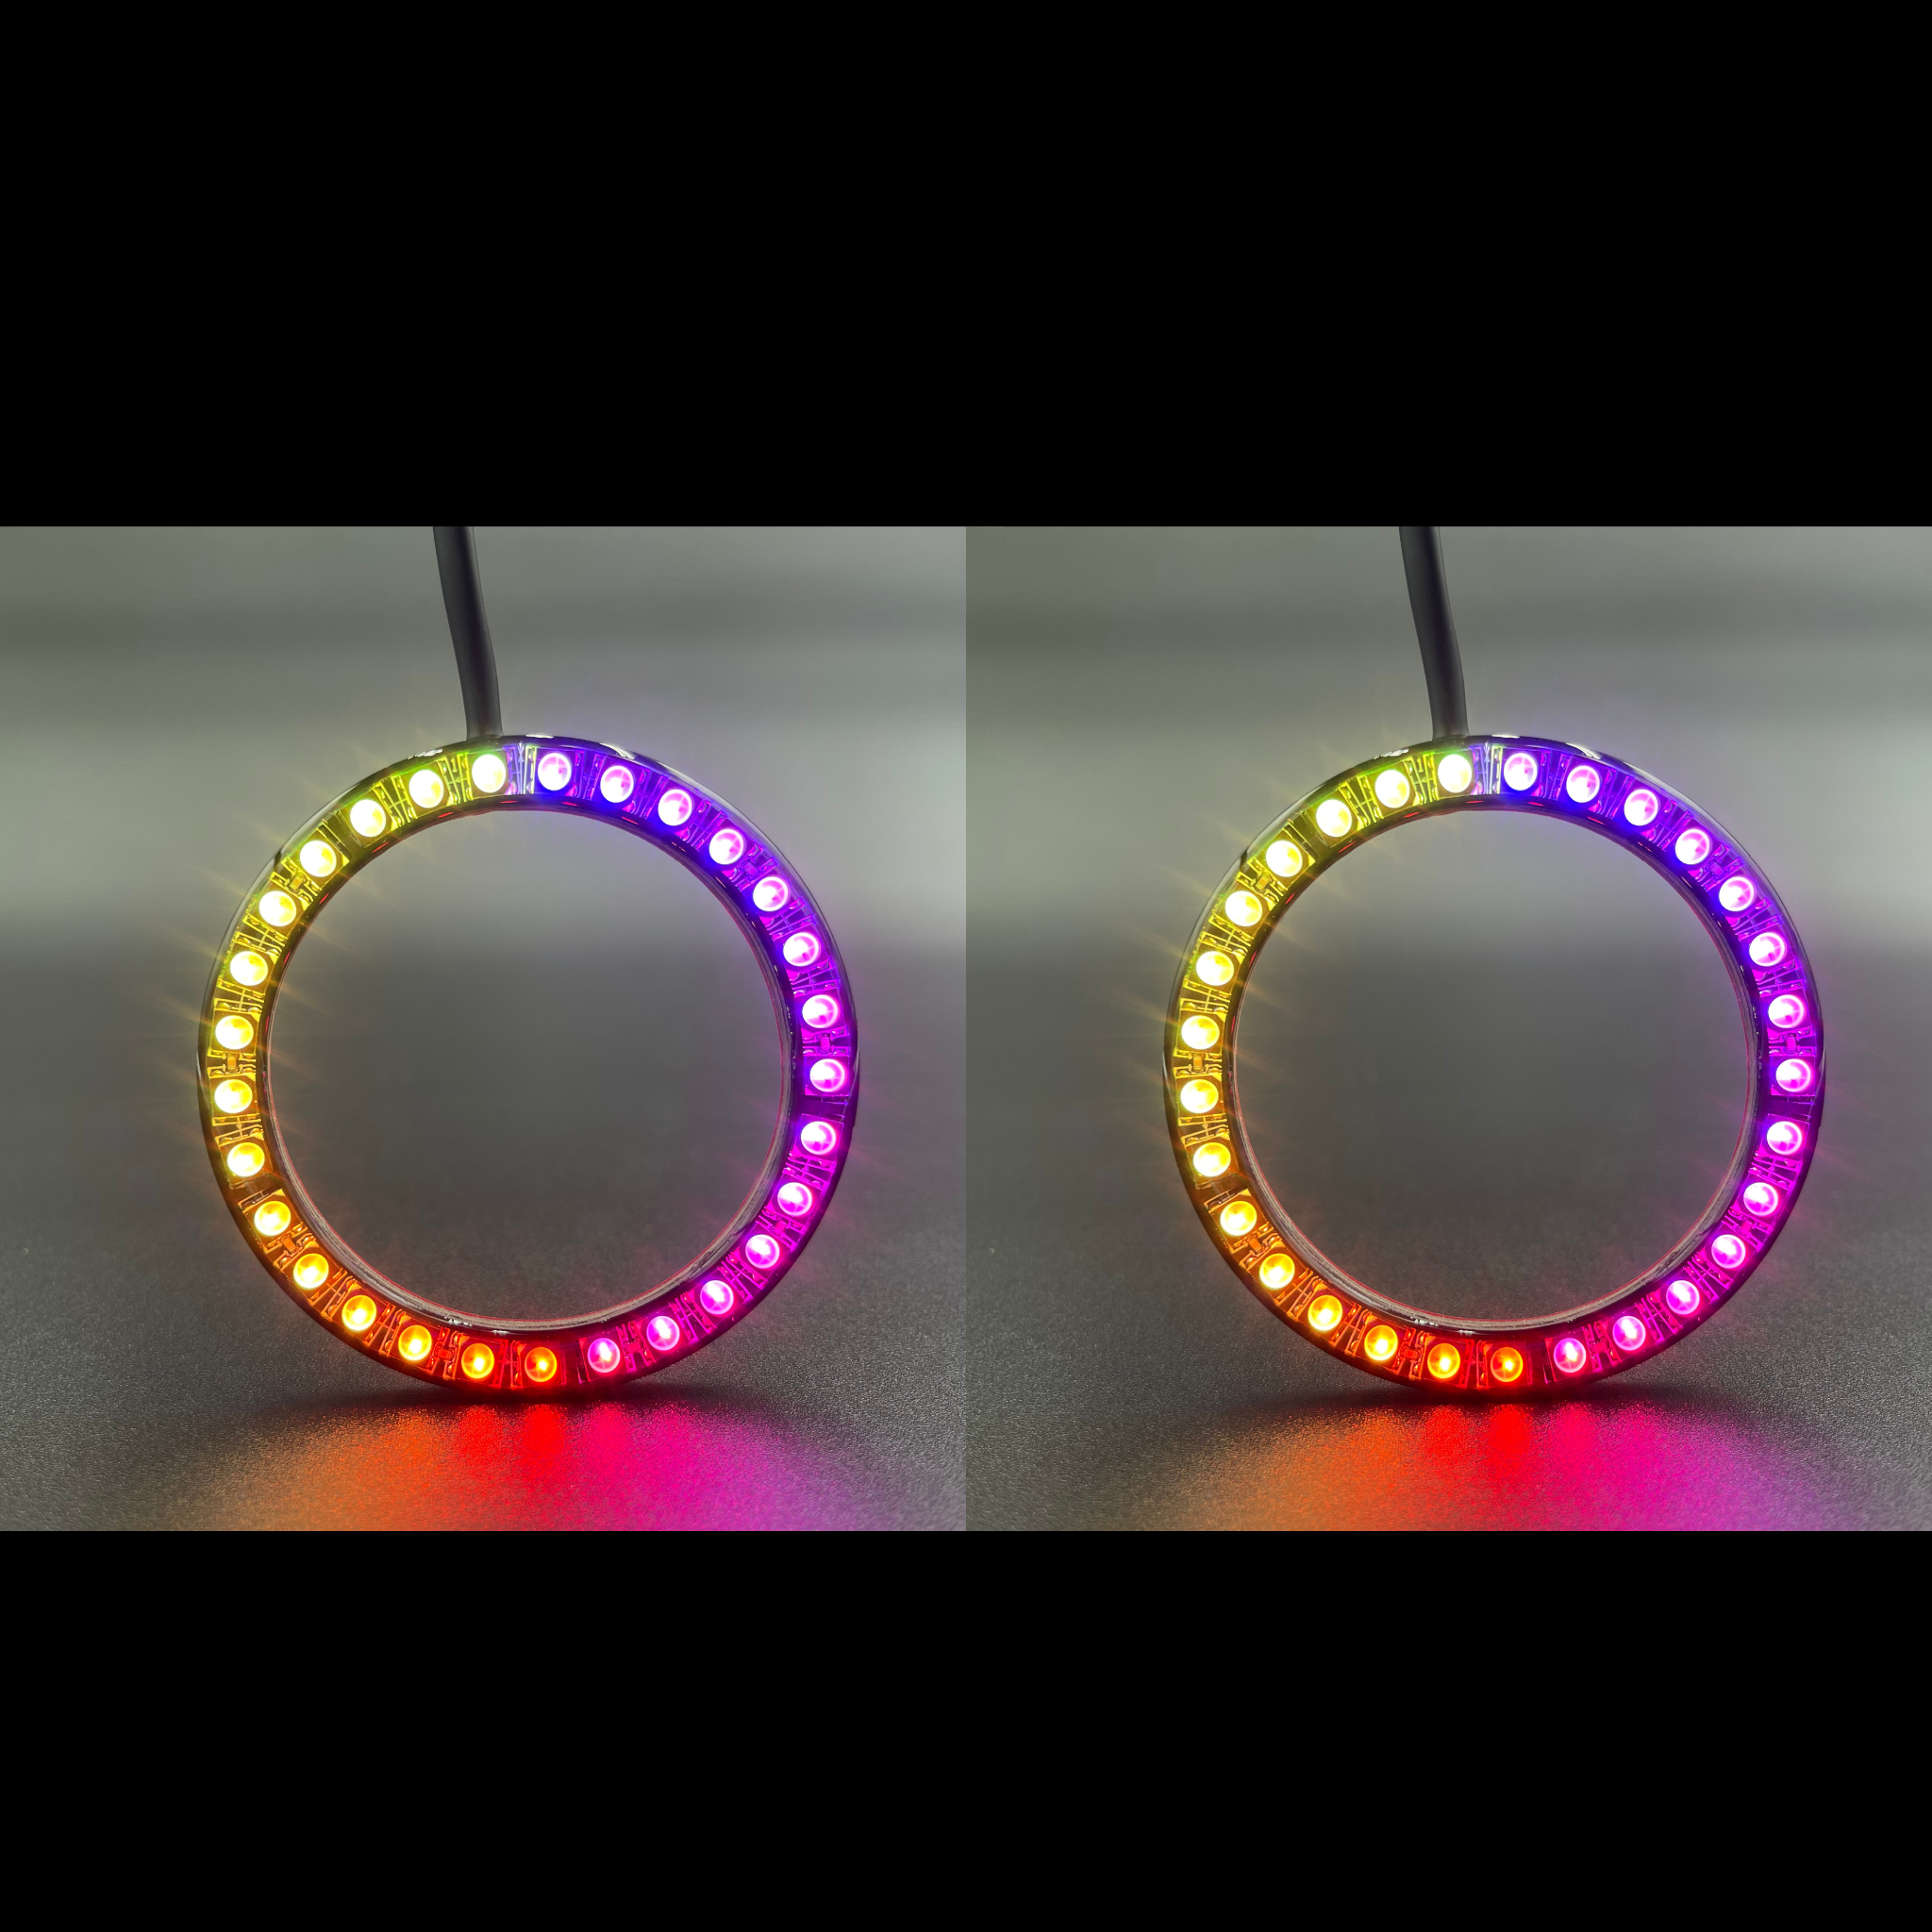 2000-2002 Lincoln LS Multicolor Halo Kit - RGB Halo Kits Multicolor Flow Series Color Chasing RGBWA LED headlight kit Oracle Lighting Trendz OneUpLighting Morimoto theretrofitsource AutoLEDTech Diode Dynamics